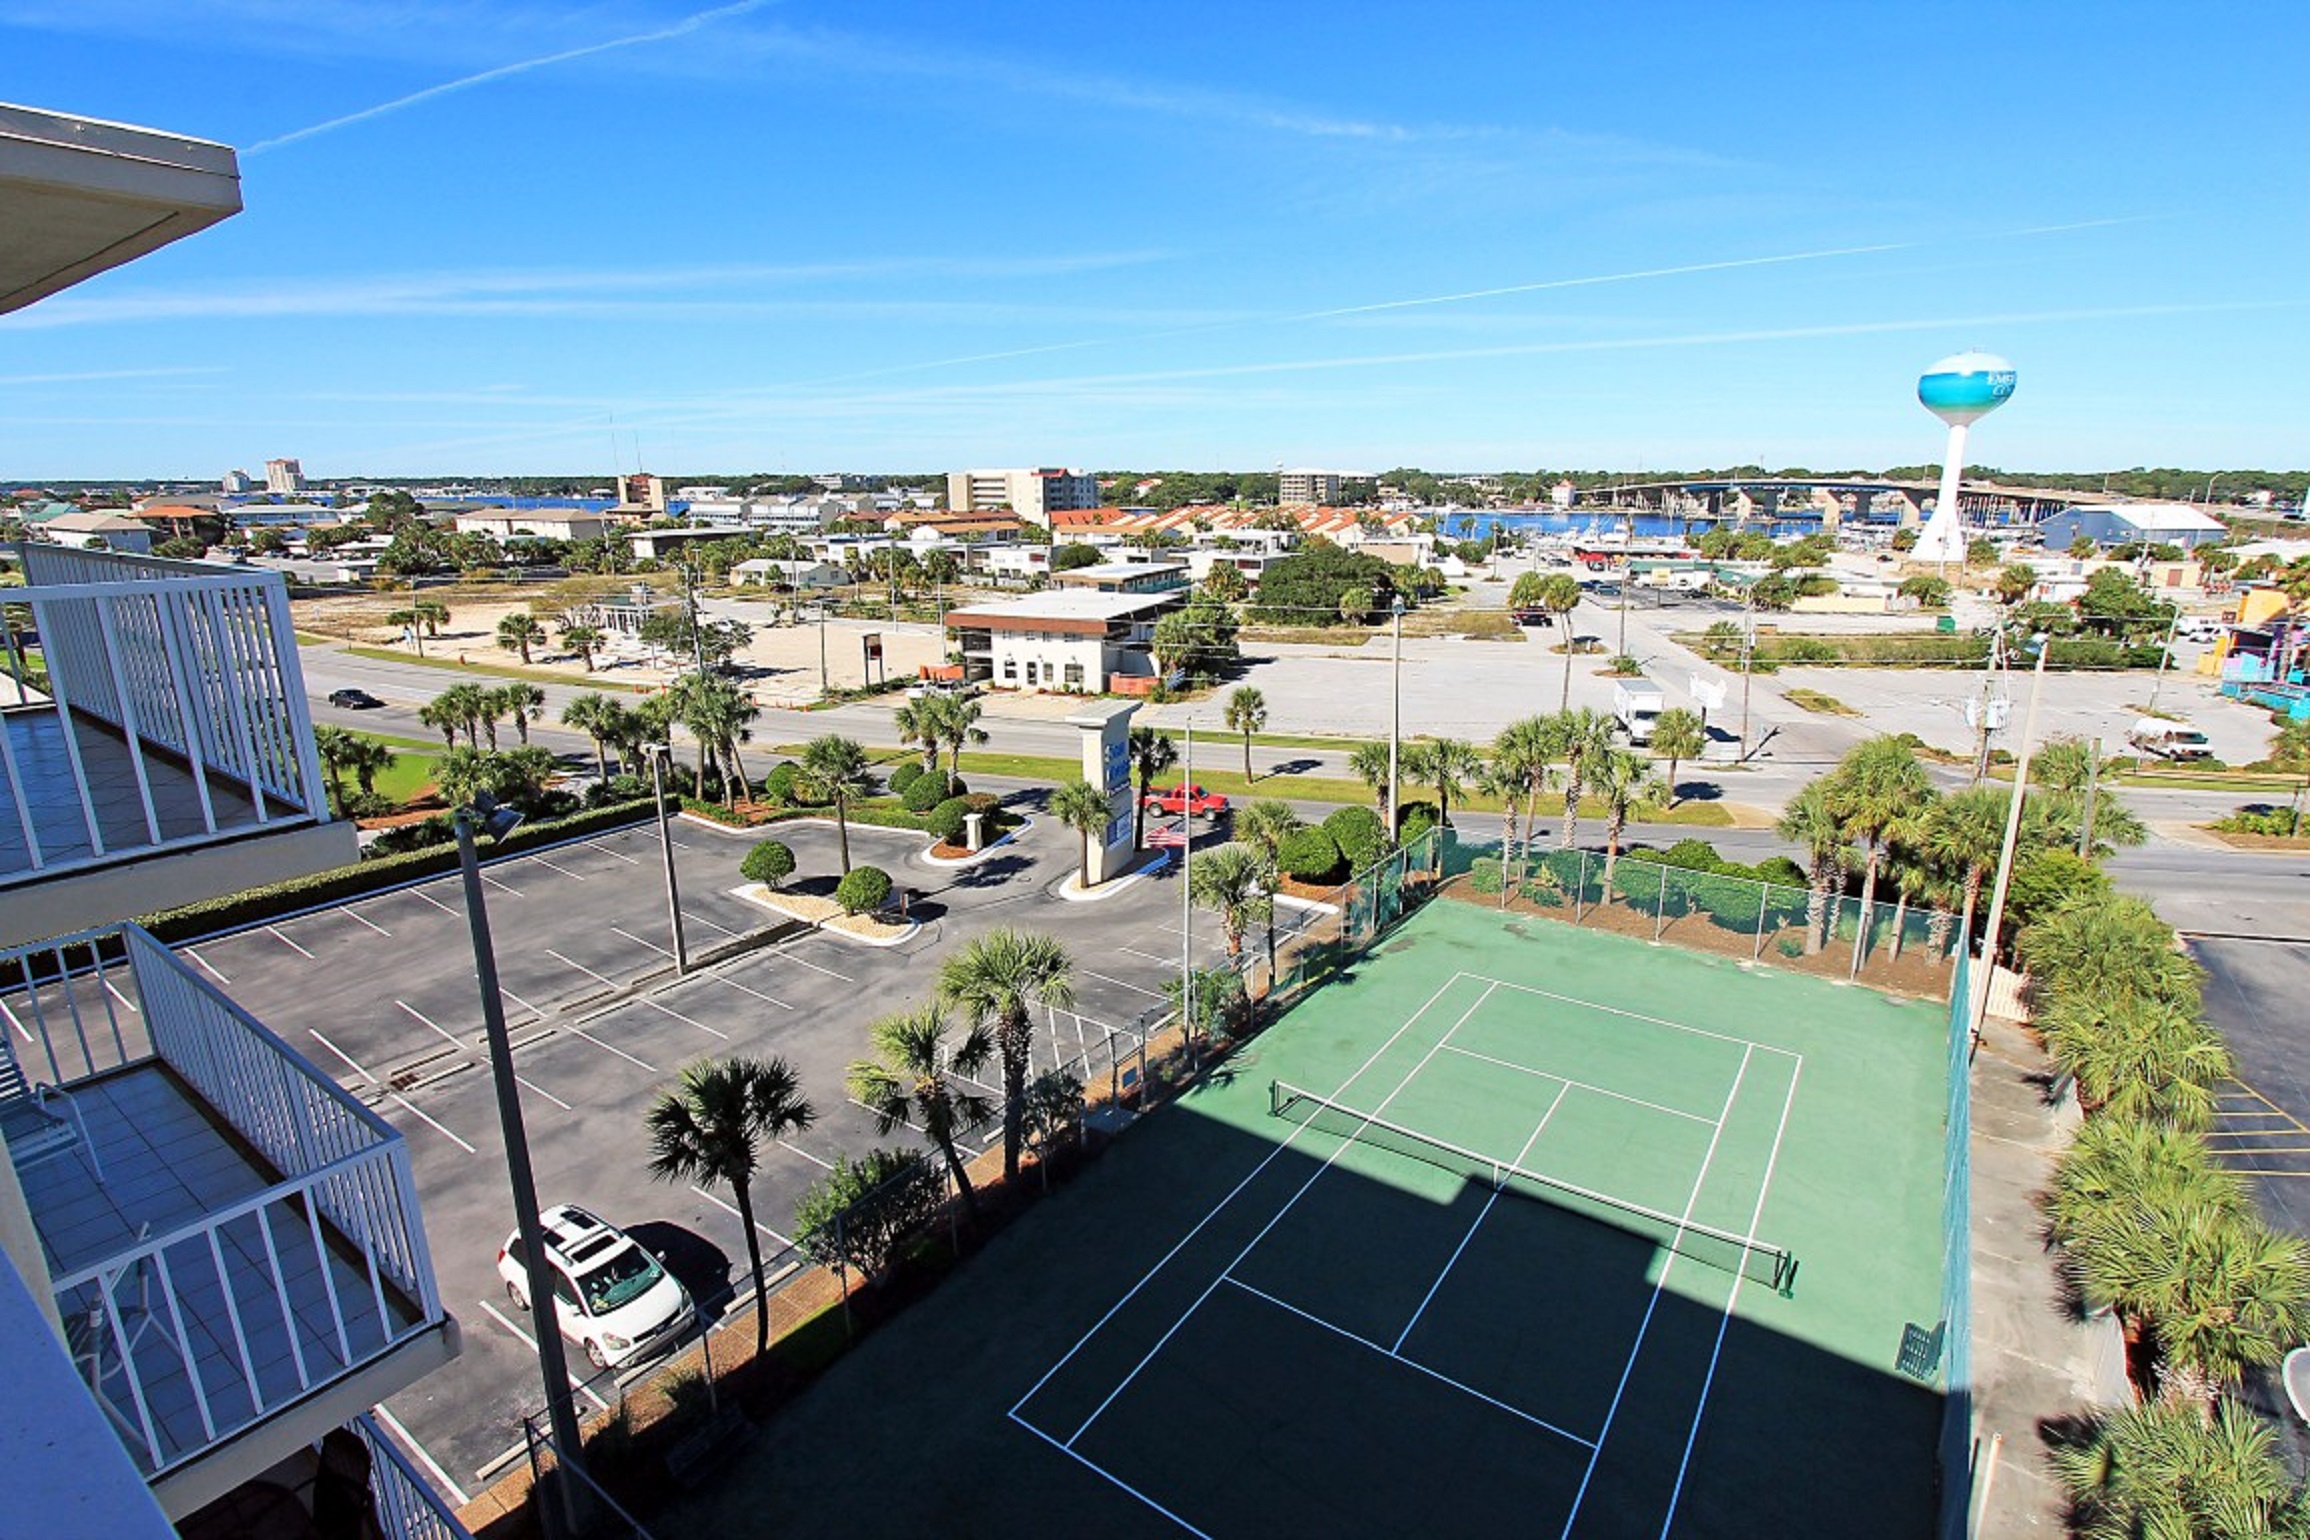 Views of Tennis Courts from Balcony